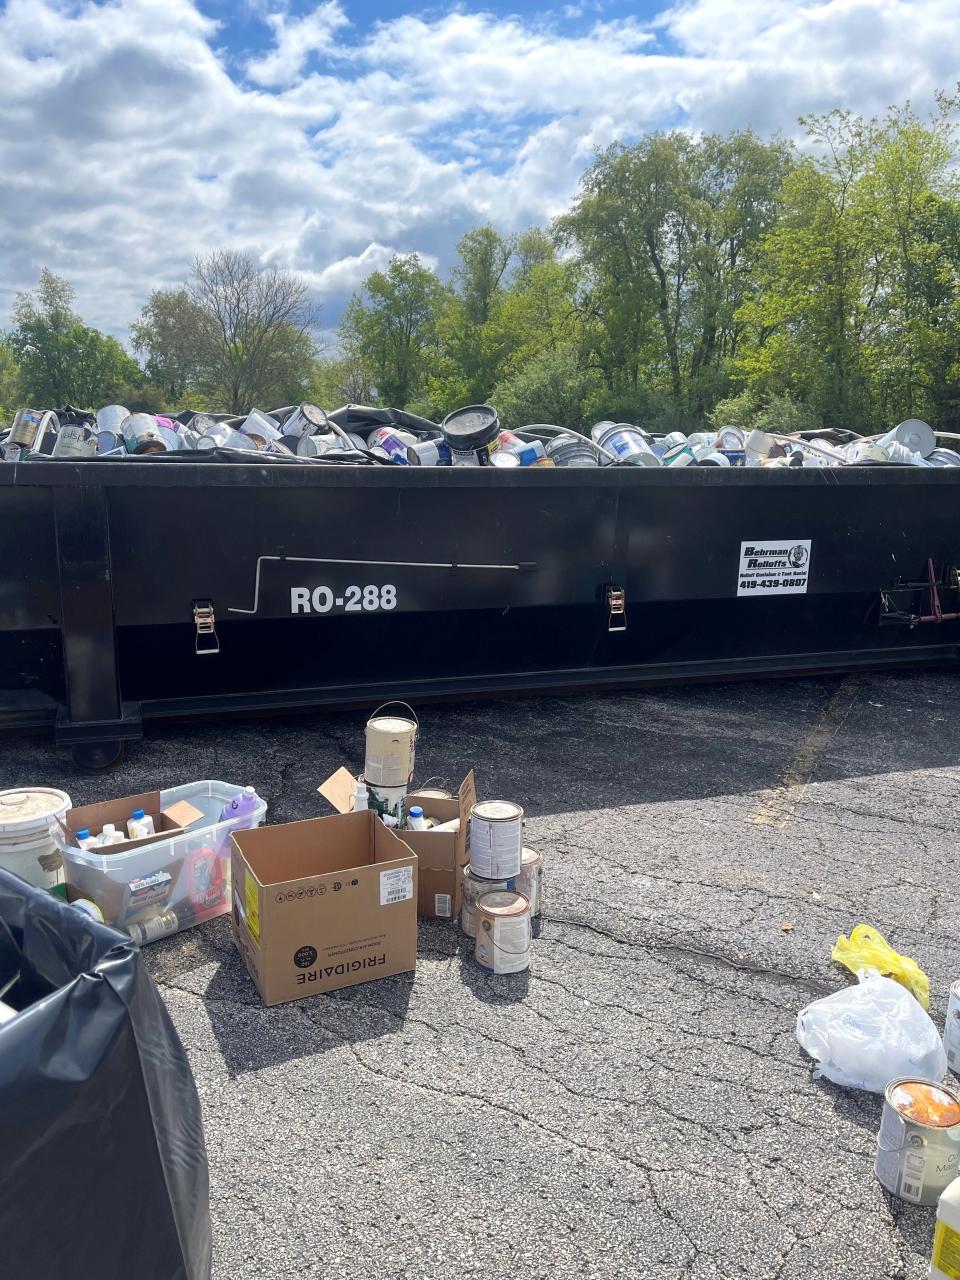 This year, Wacker Chemical and Anderson Development collected more than 35,000 kg.  of household hazardous waste from Lenawee County residents during an annual household hazardous waste collection event.